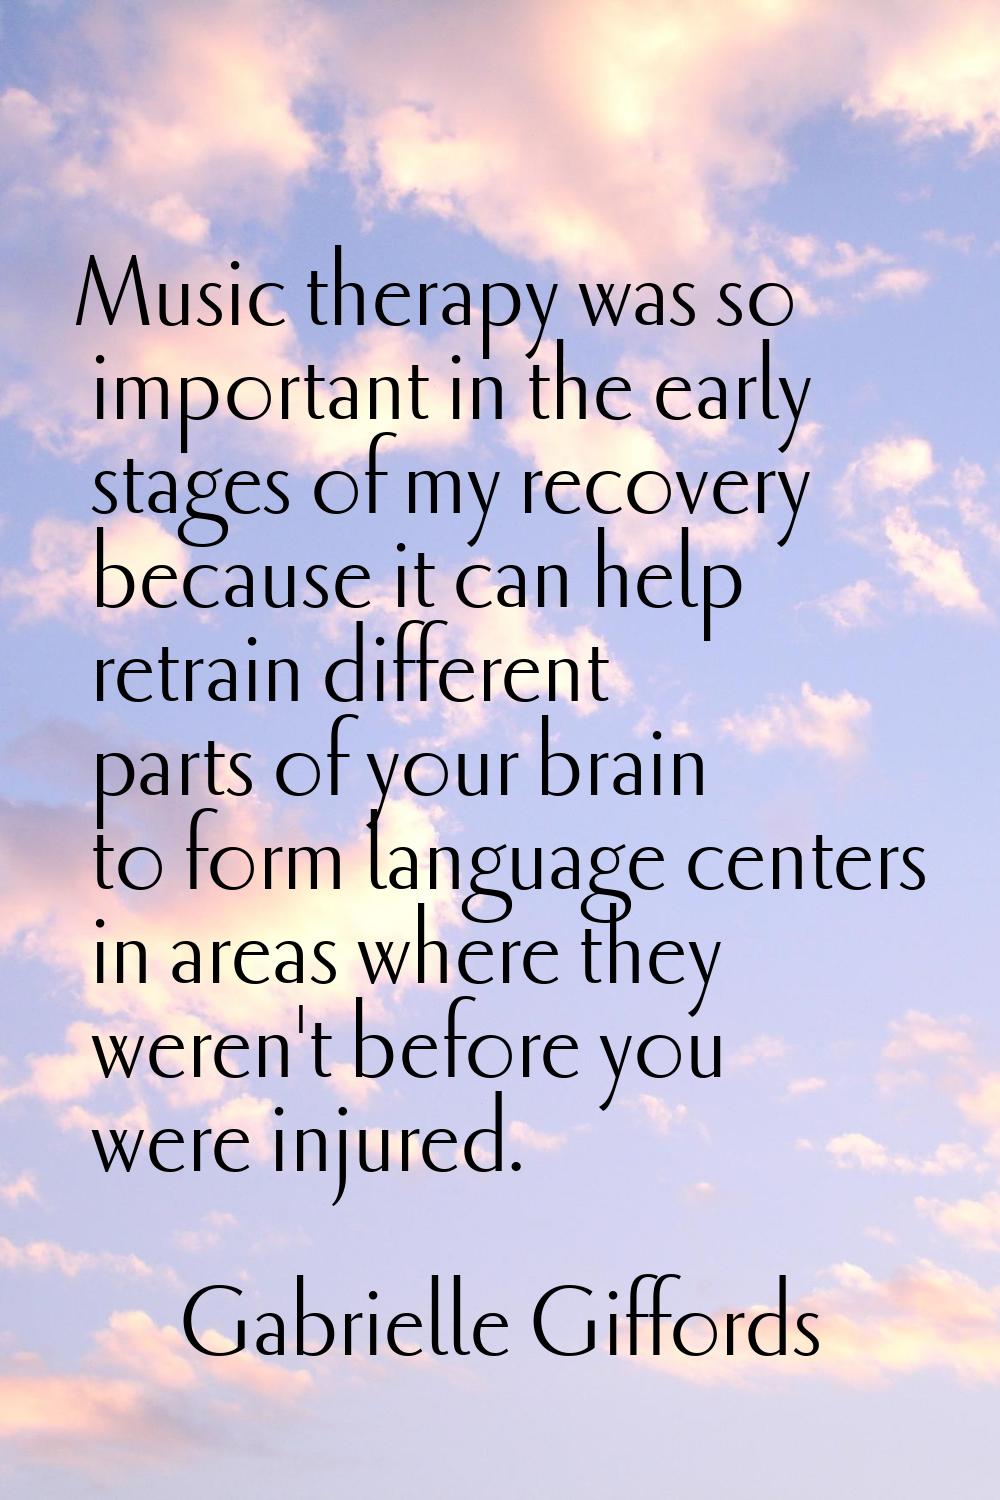 Music therapy was so important in the early stages of my recovery because it can help retrain diffe